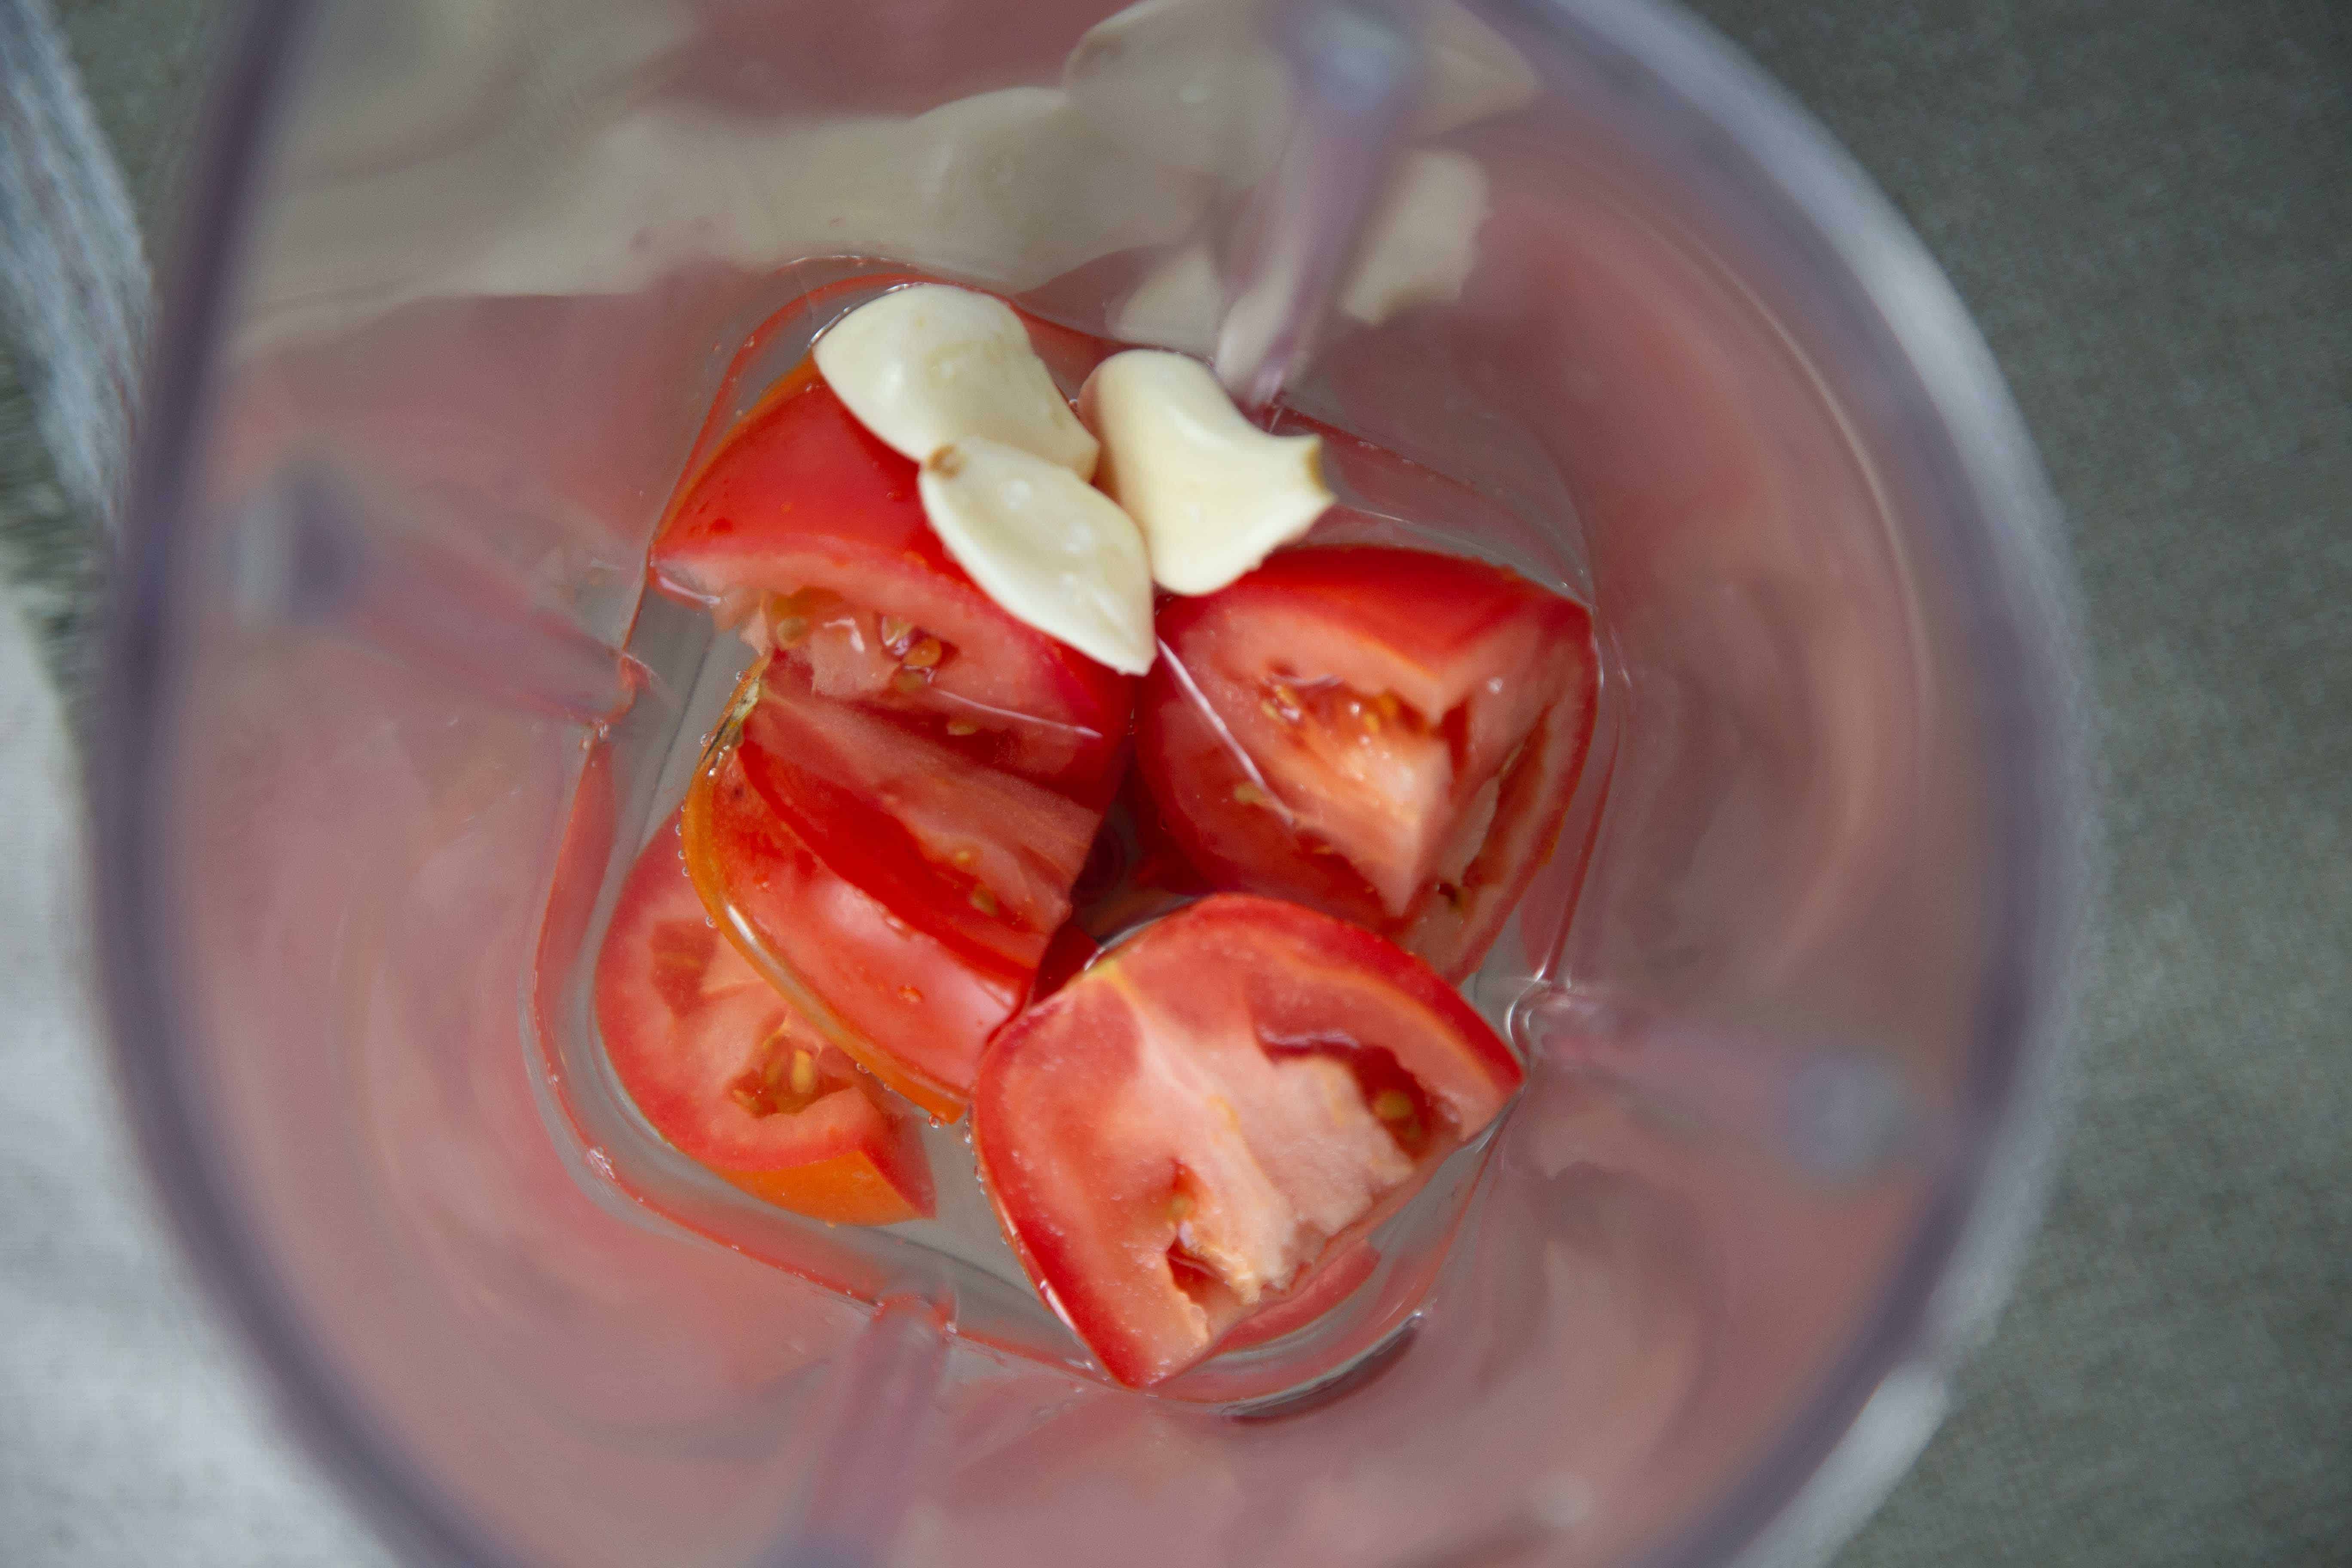 tomatoes, garlic and water in a blender